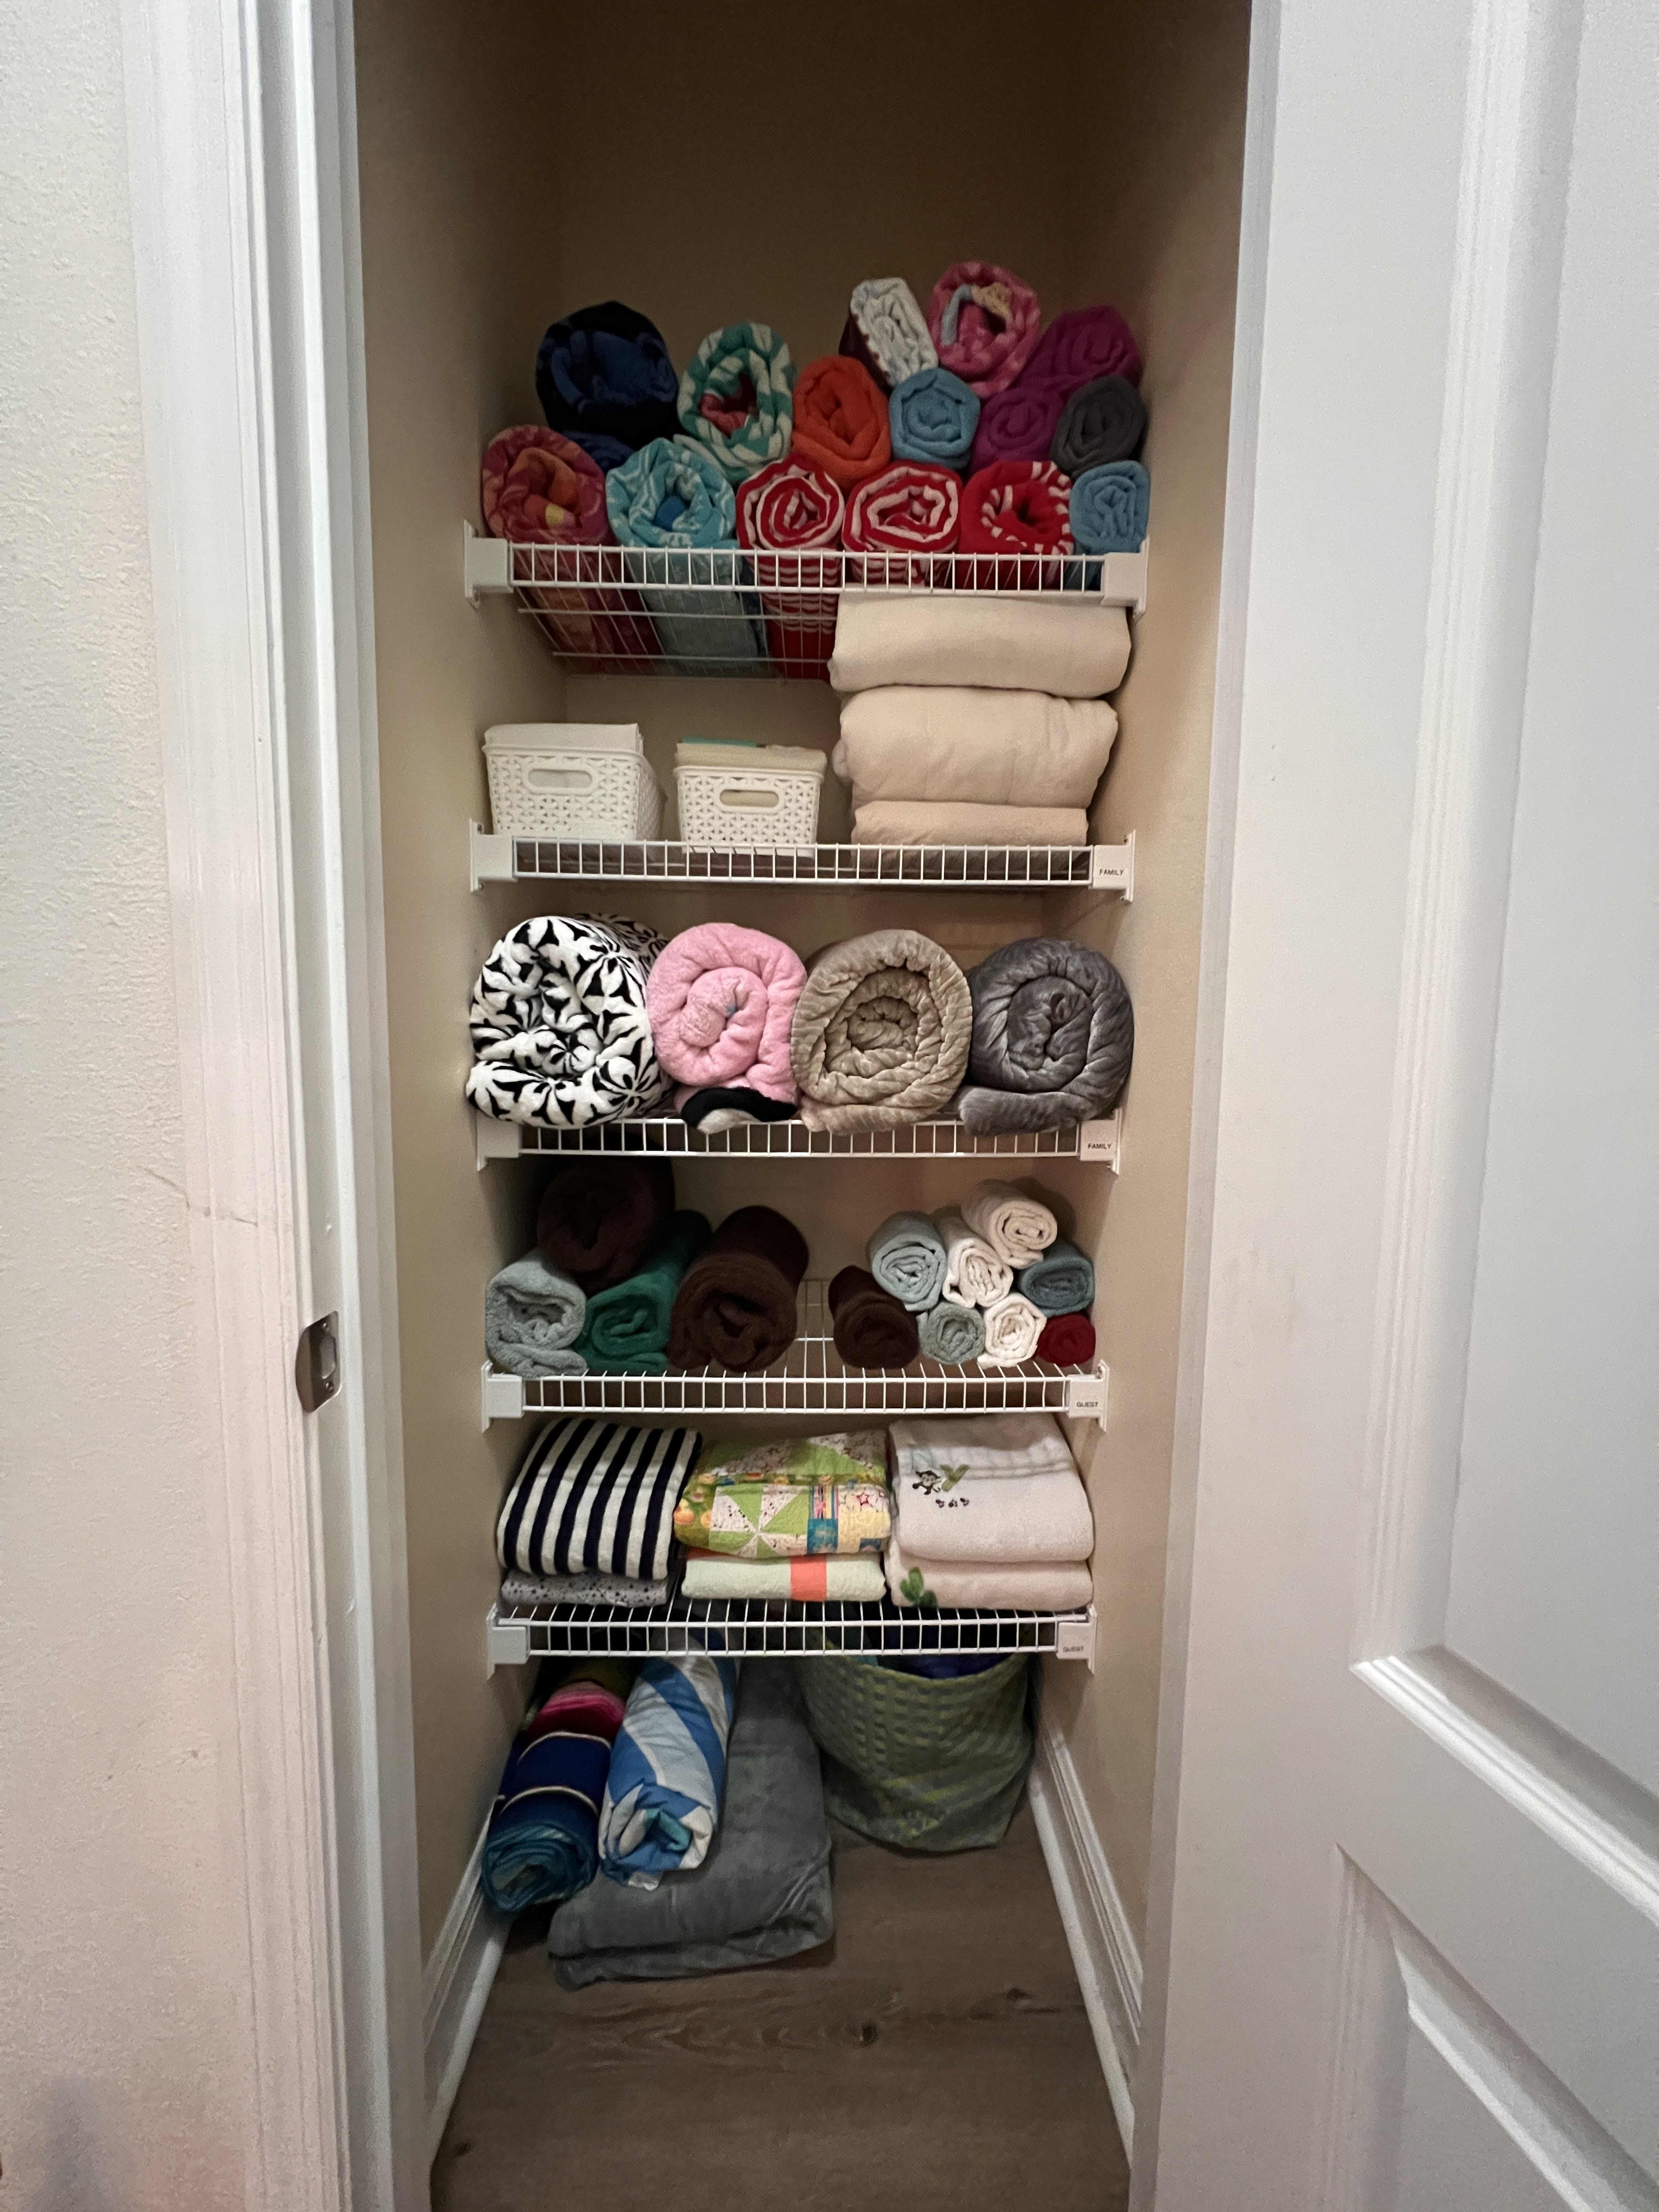 Linen Closet Organizing: Readying Our Home for Guests